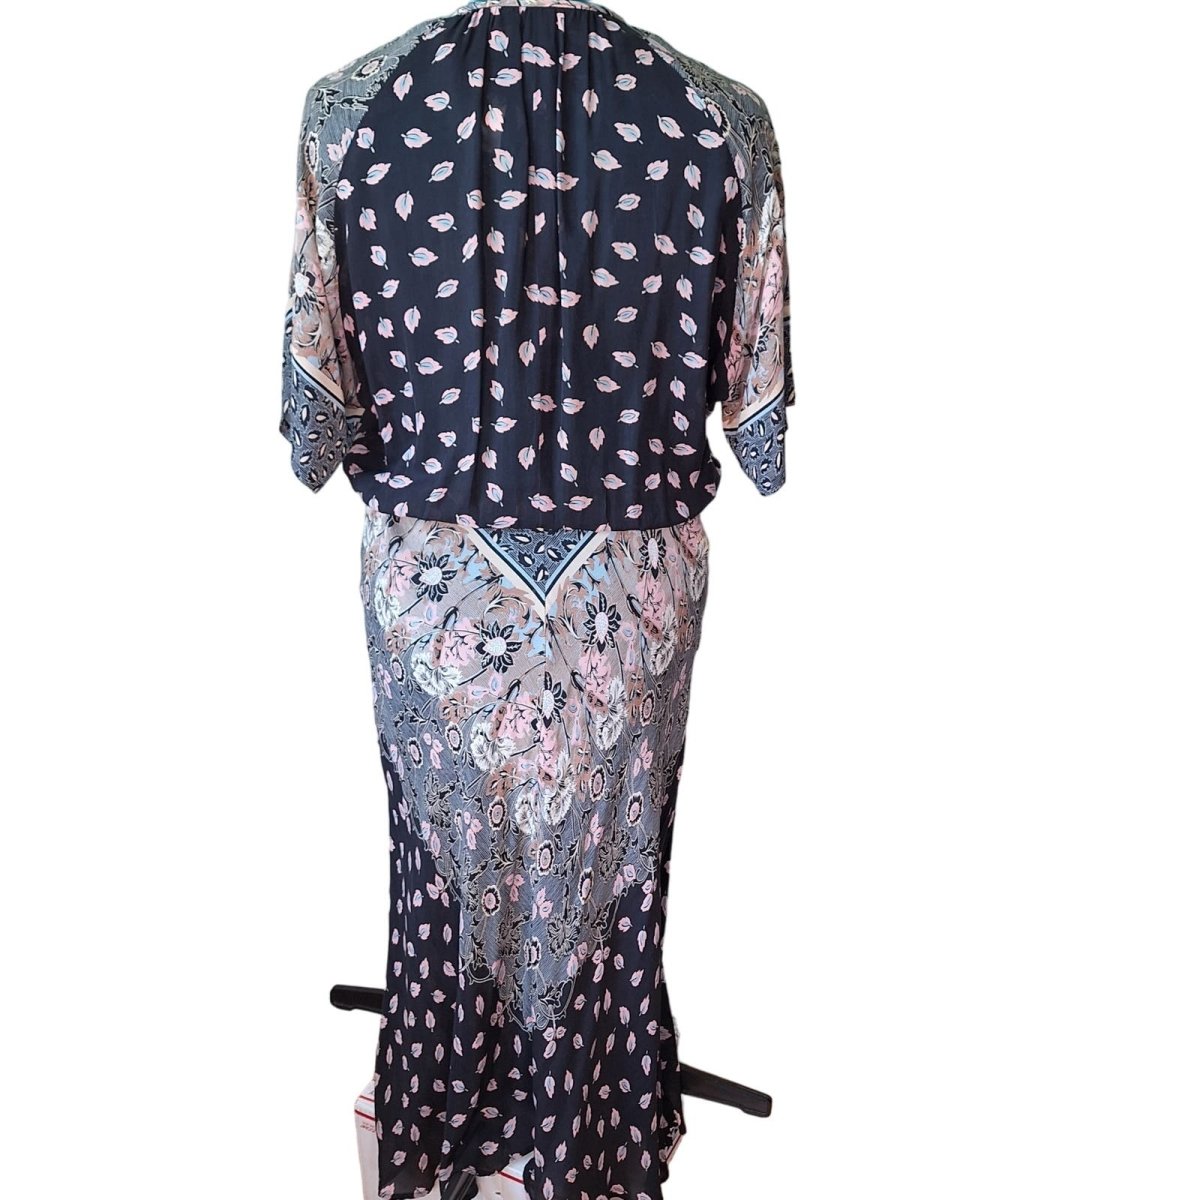 Vintage 70s does 30s Semi-Sheer Black Floral Maxi Dress Women Size Large - themallvintage The Mall Vintage